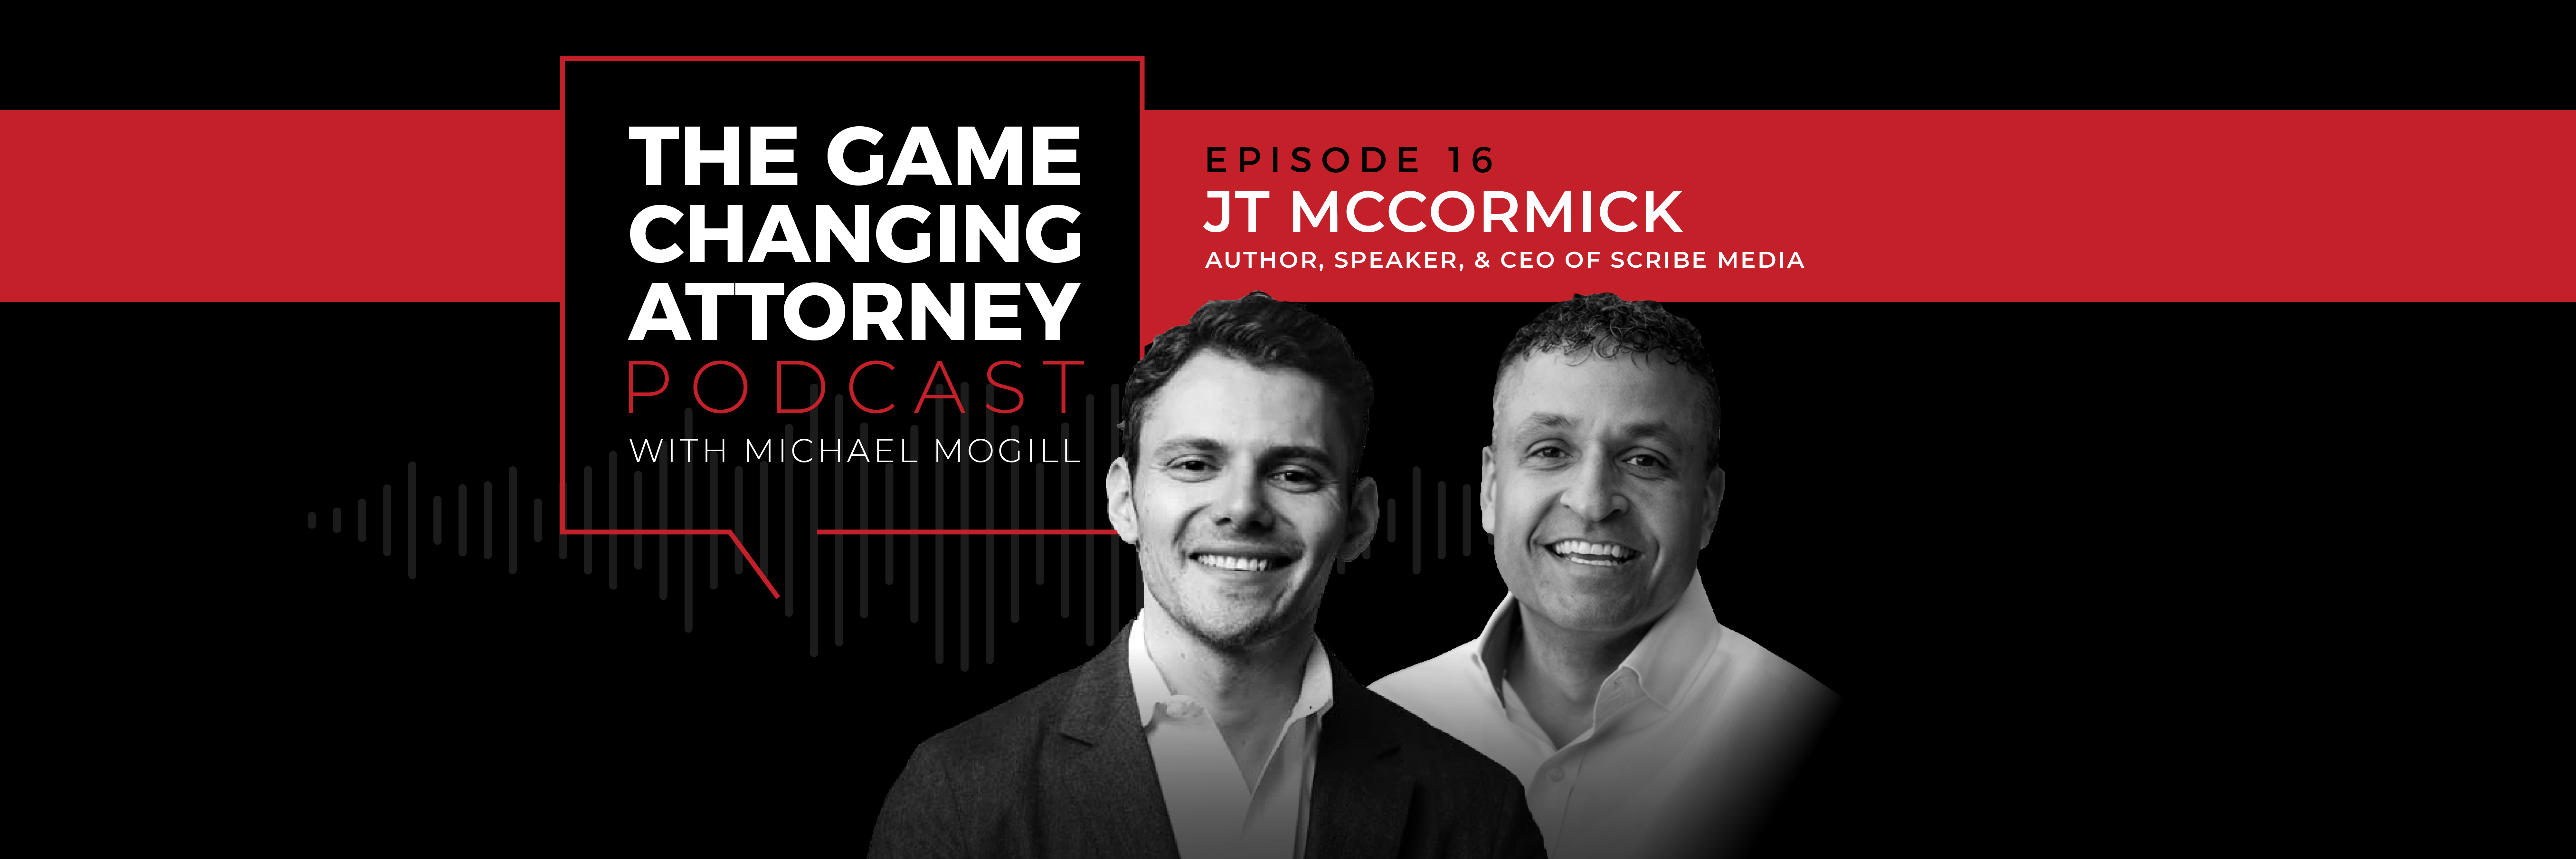 JT McCormick - The Game Changing Attorney Podcast - Desktop